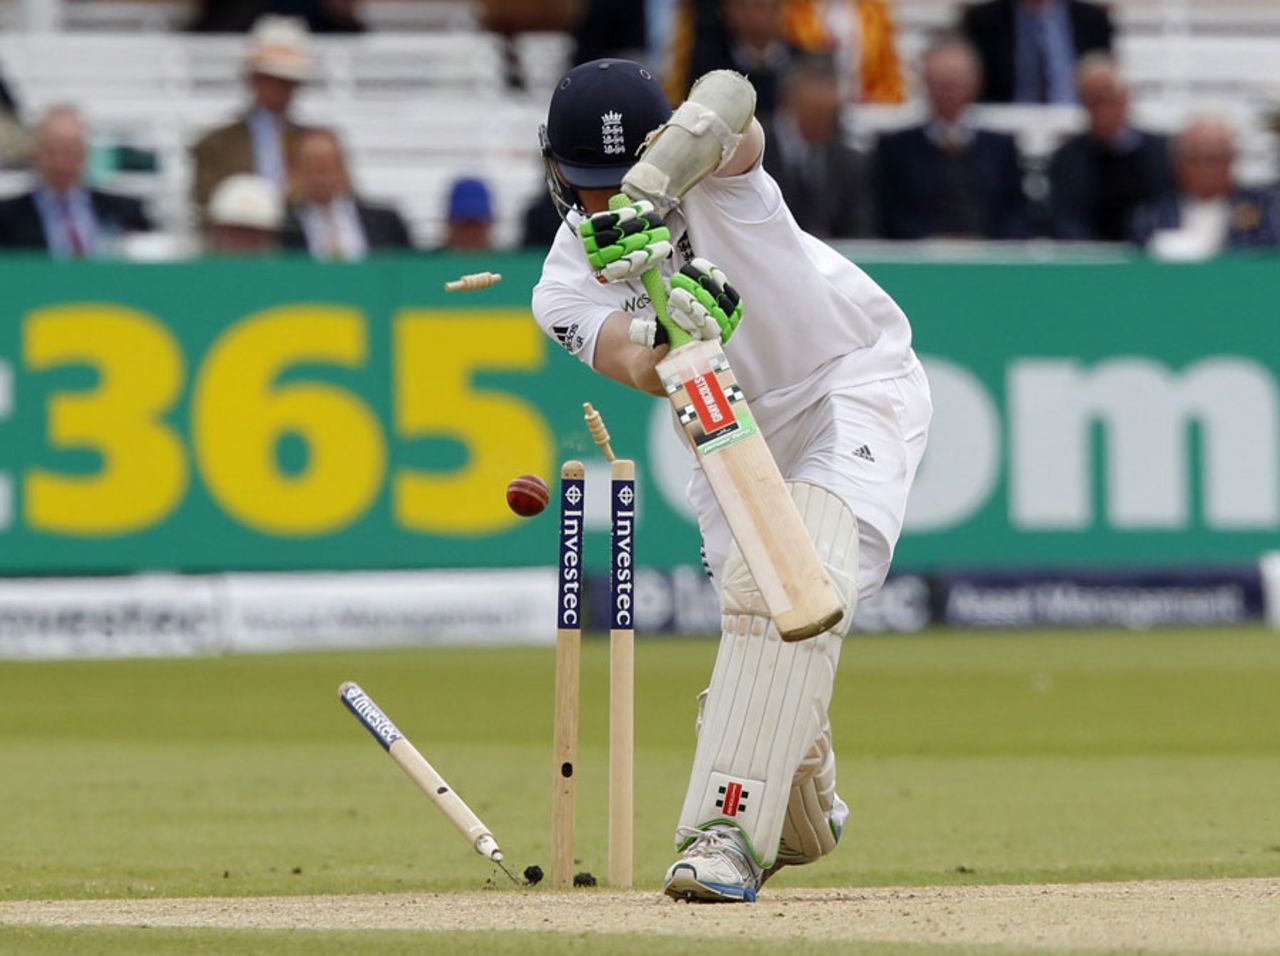 Sam Robson was bowled off an inside edge, England v Sri Lanka, 1st Investec Test, Lord's, 4th day, June 15, 2014